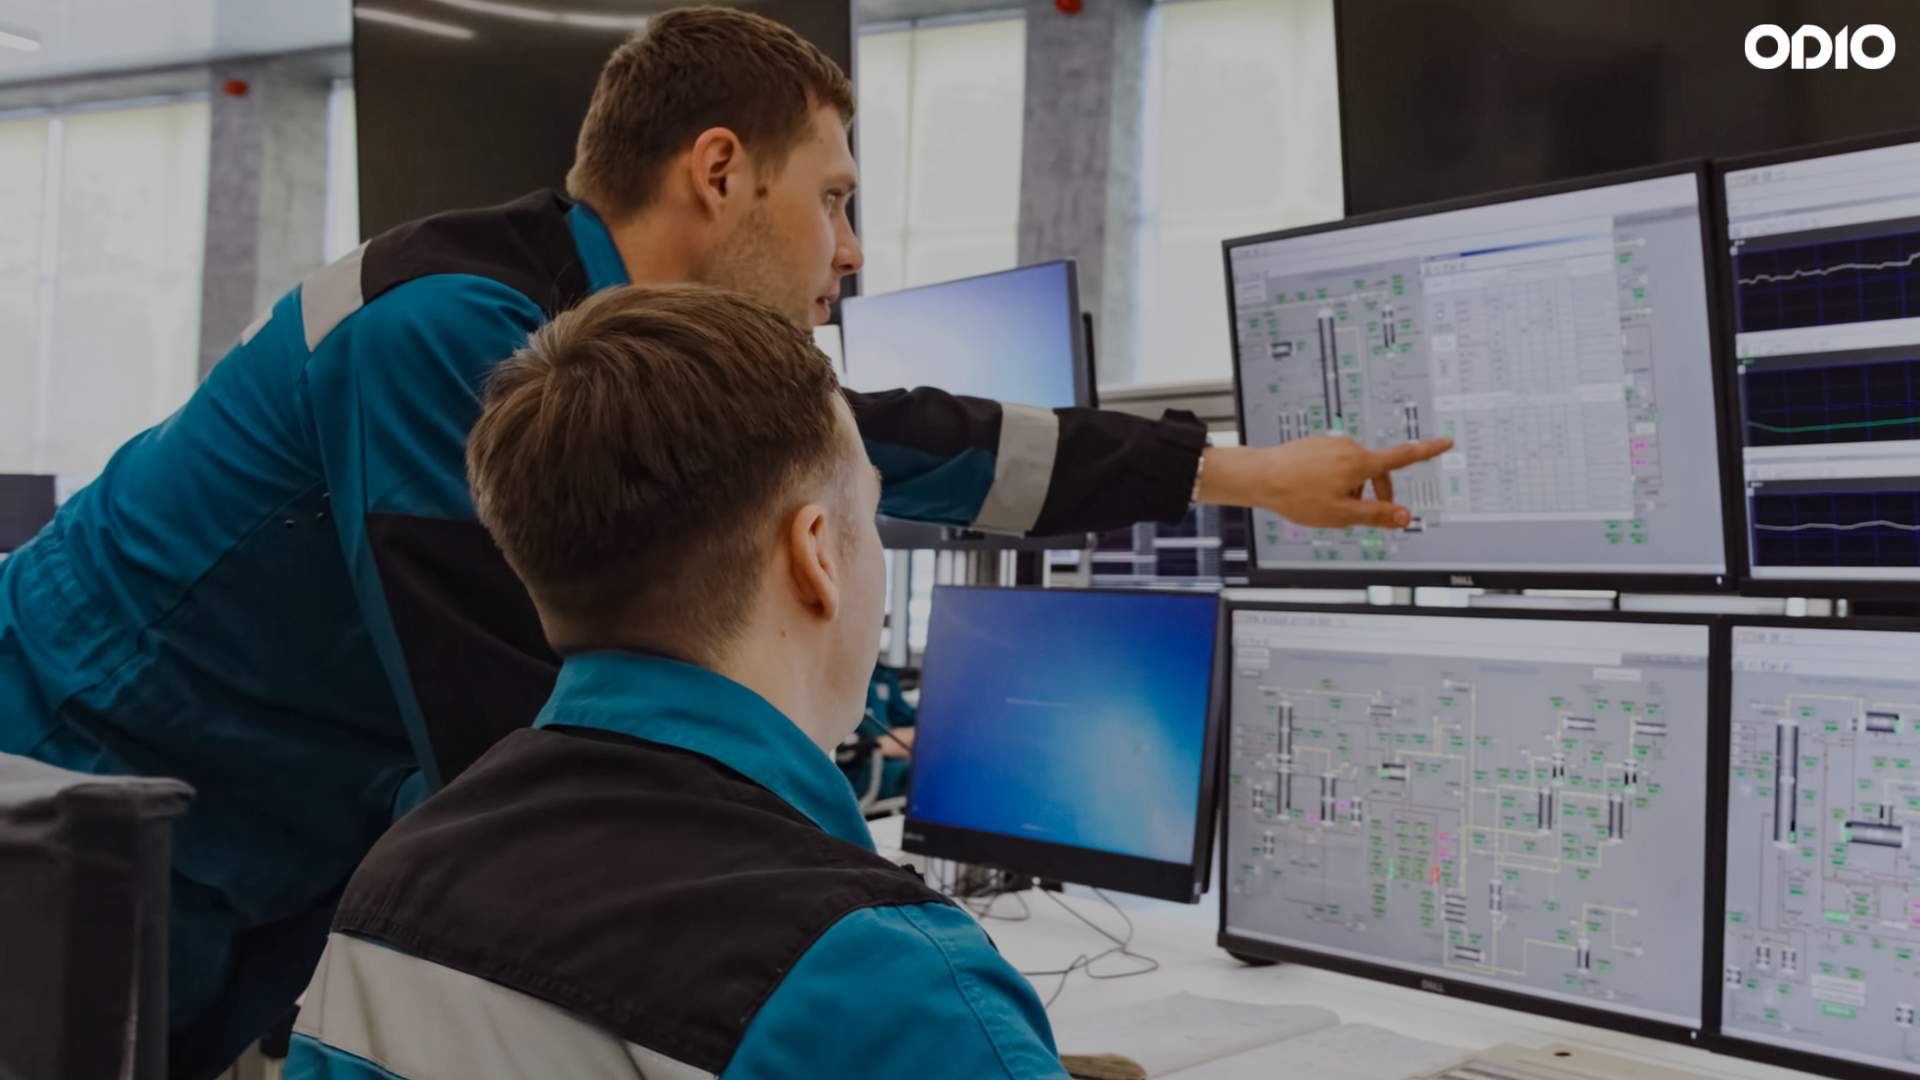 Image showing 2 Contact center agensts looking at their monitor to monitor the performance in real-time.